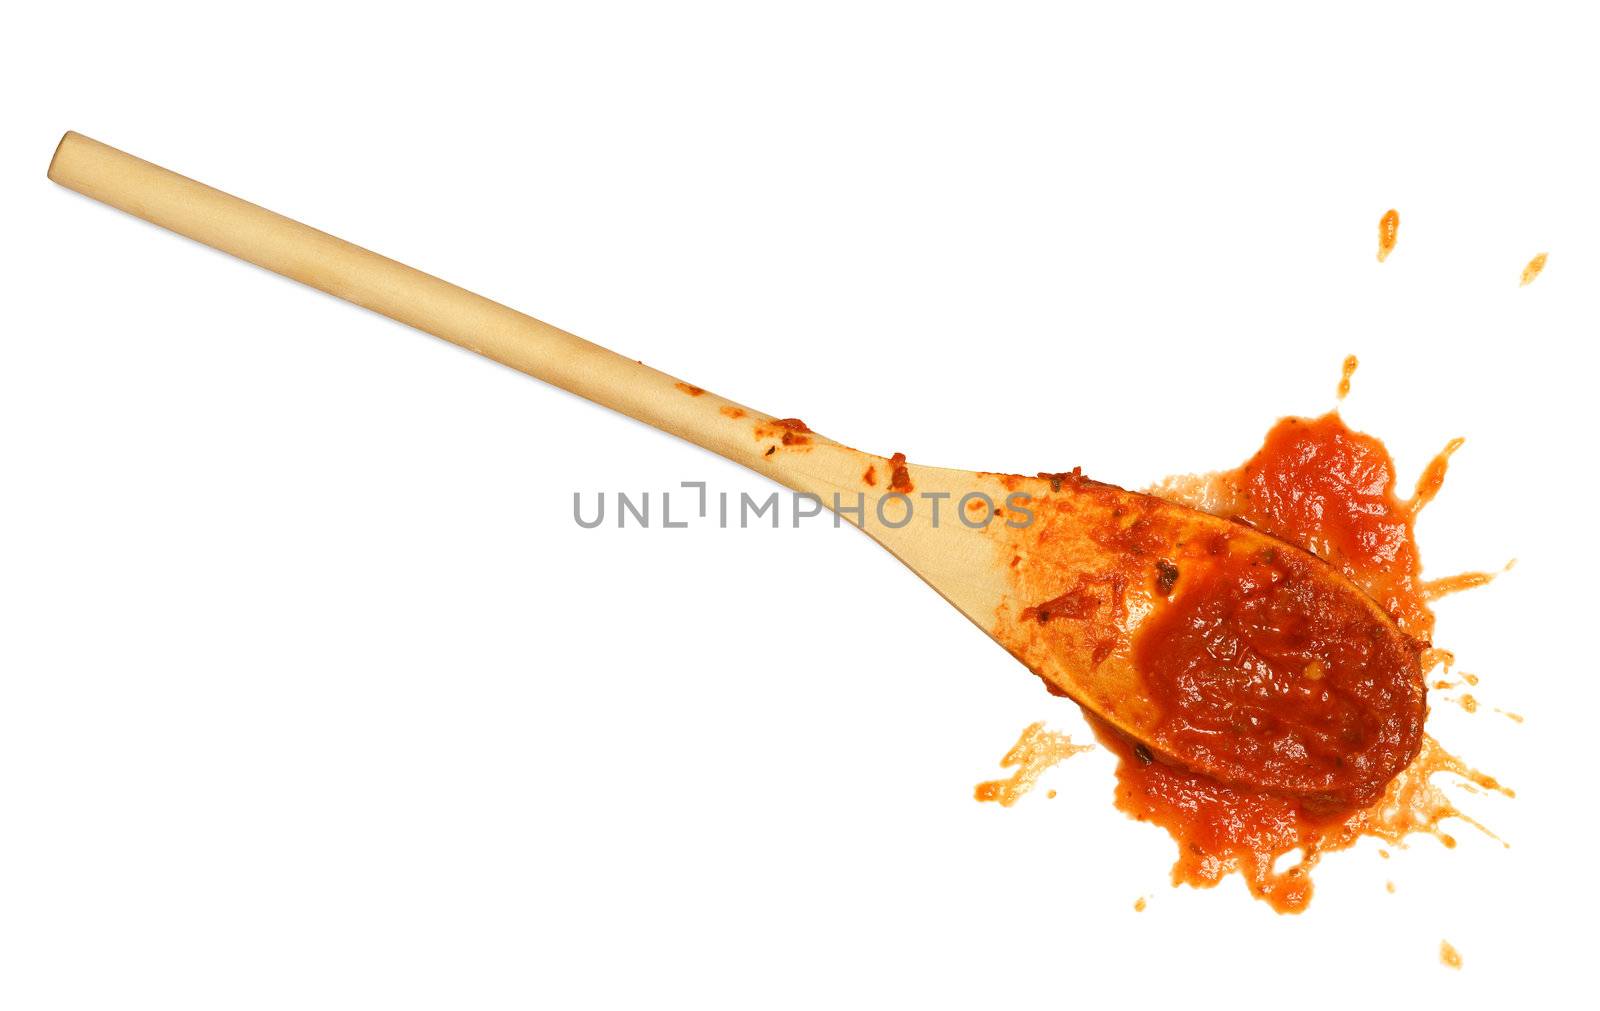 Tomato sauce spoon by sumners